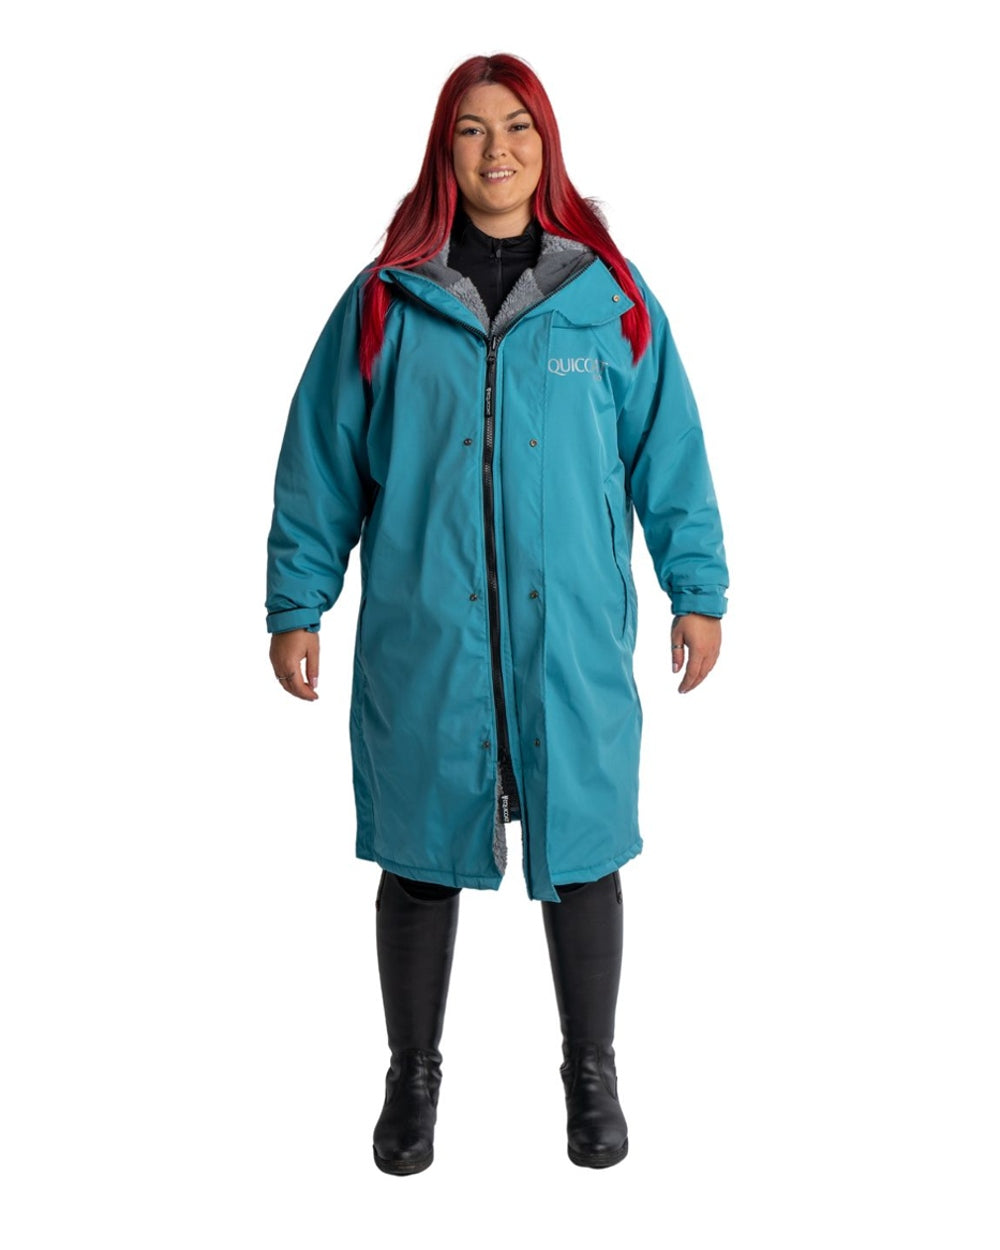 Equicoat Adults Pro Coat in Teal 